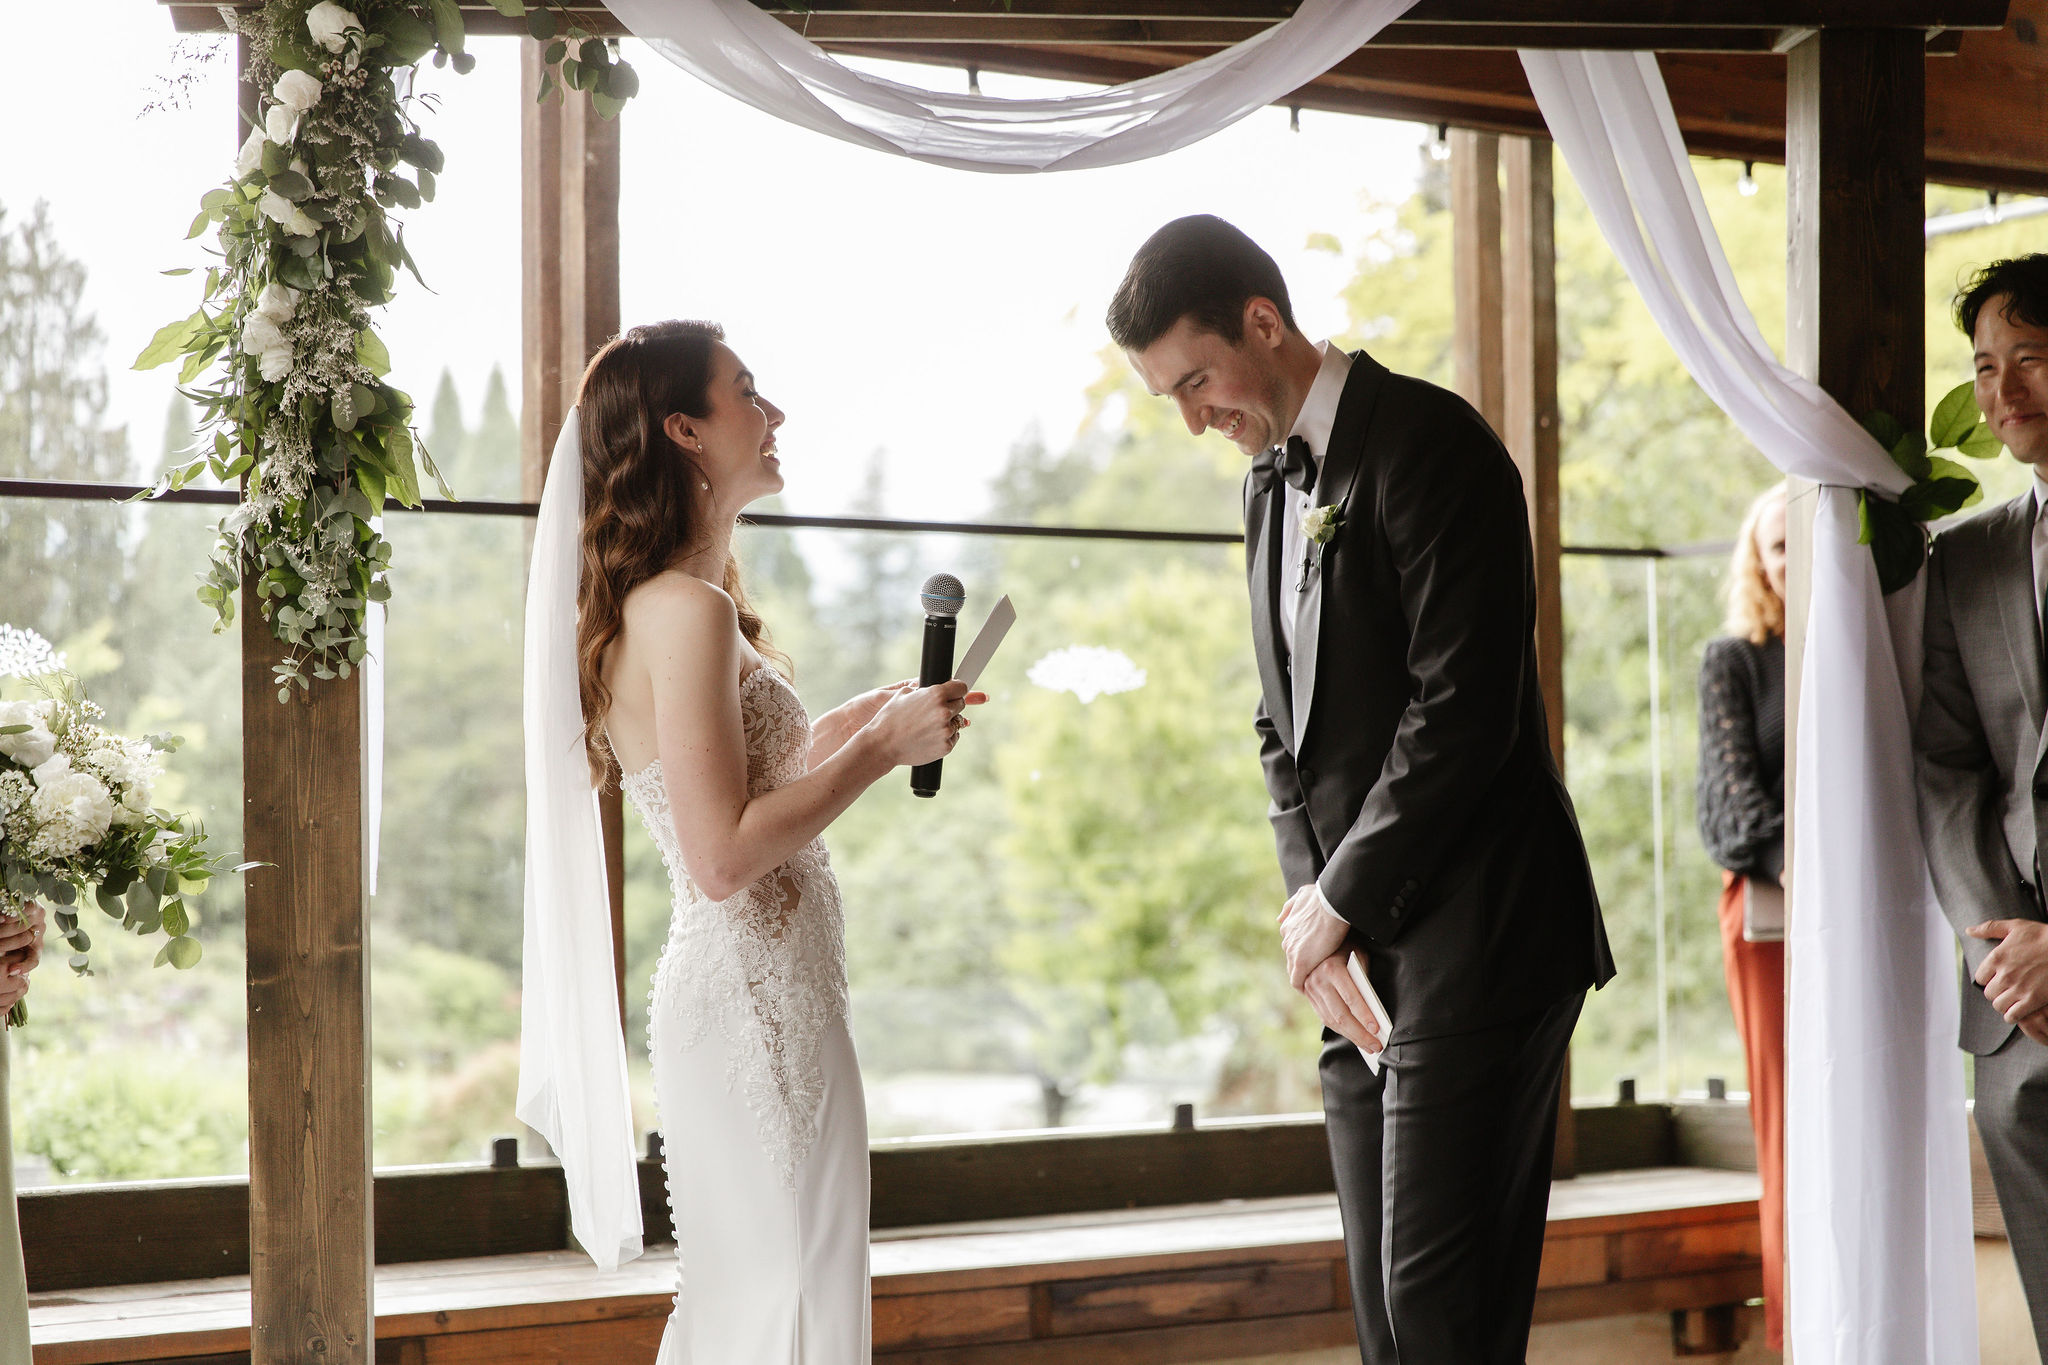 modern wedding vows at young hip & married vancouver wedding ceremony